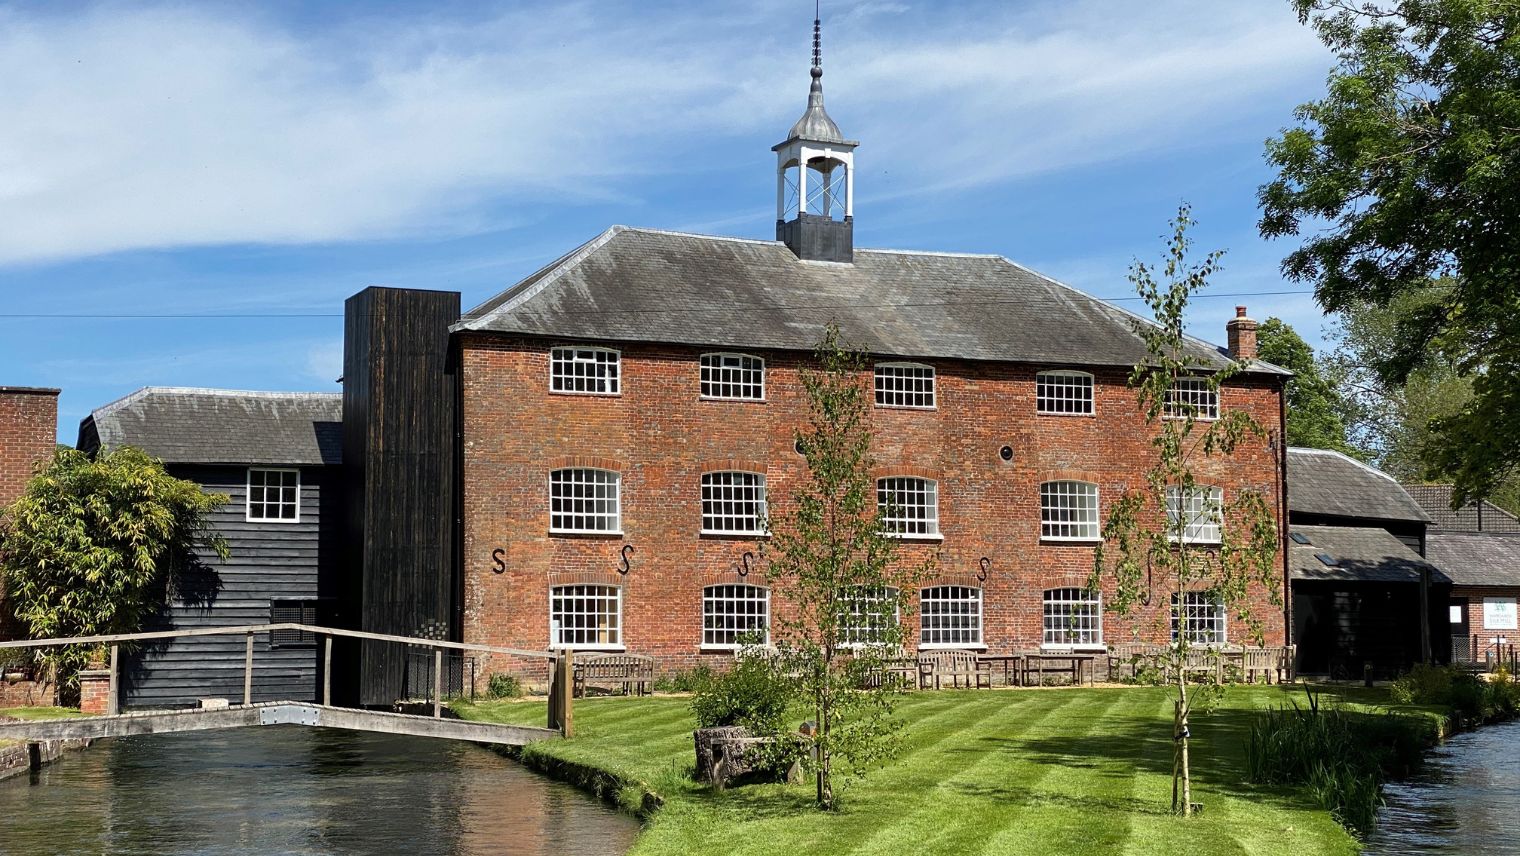 Silk mill in Whitchurch